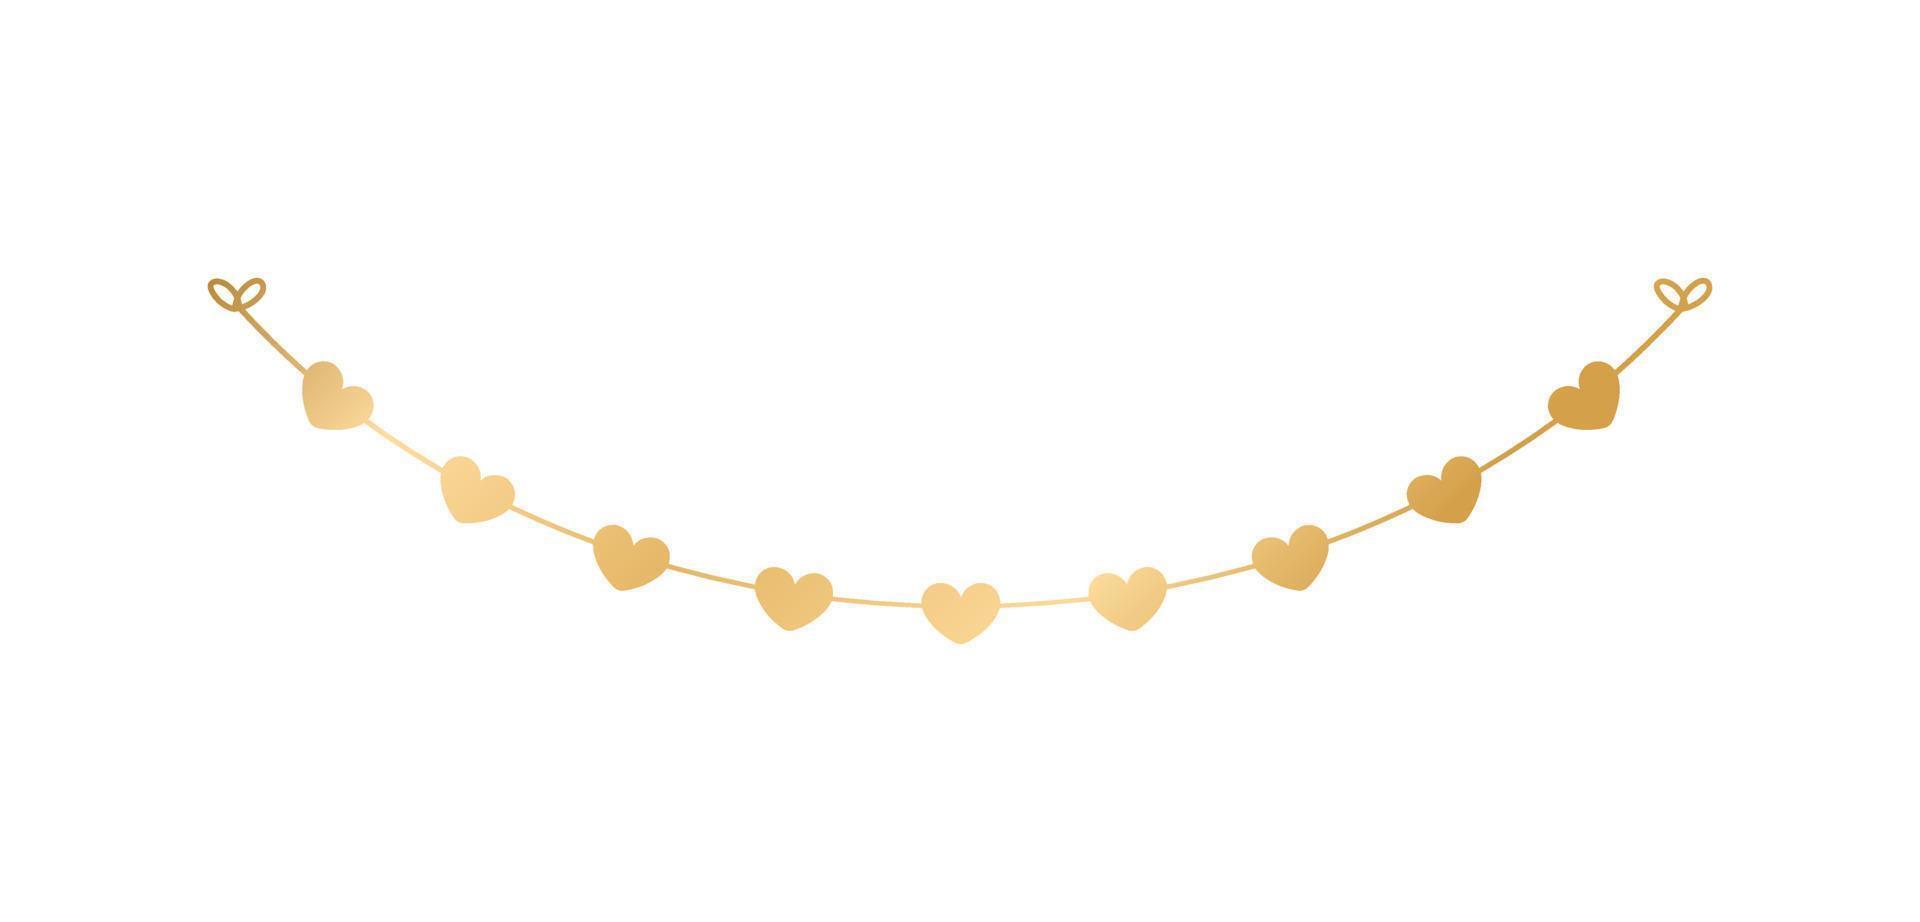 Gold Hearts Garland, Festive Birthday, Valentines Party celebration, Hanging buntings garlands vector illustration